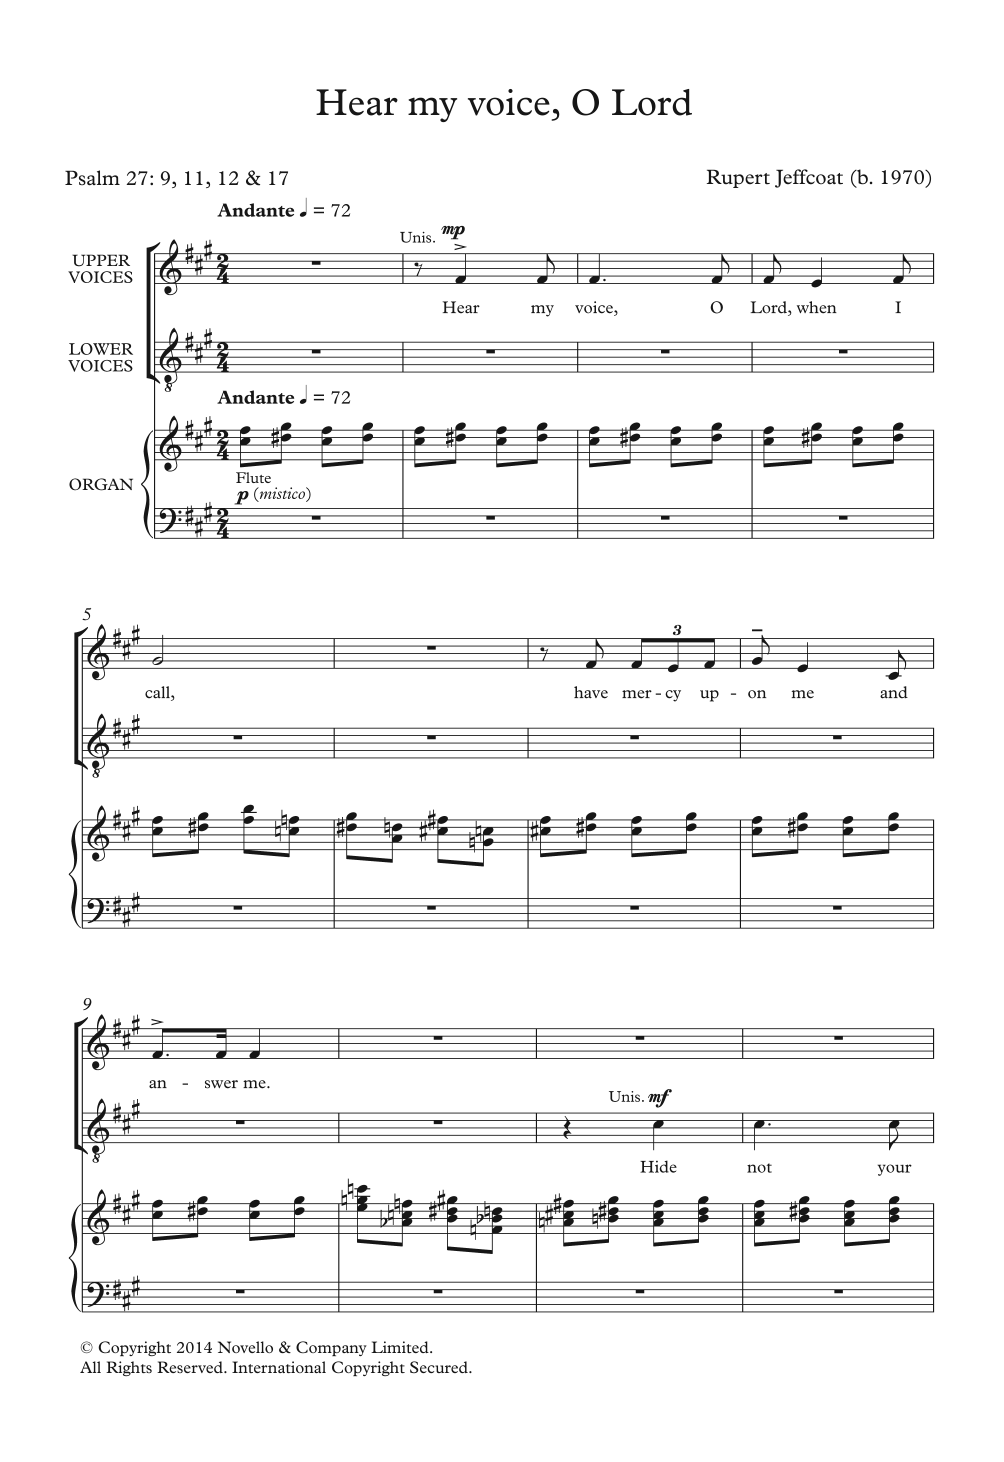 Download Rupert Jeffcoat Hear My Voice, O Lord Sheet Music